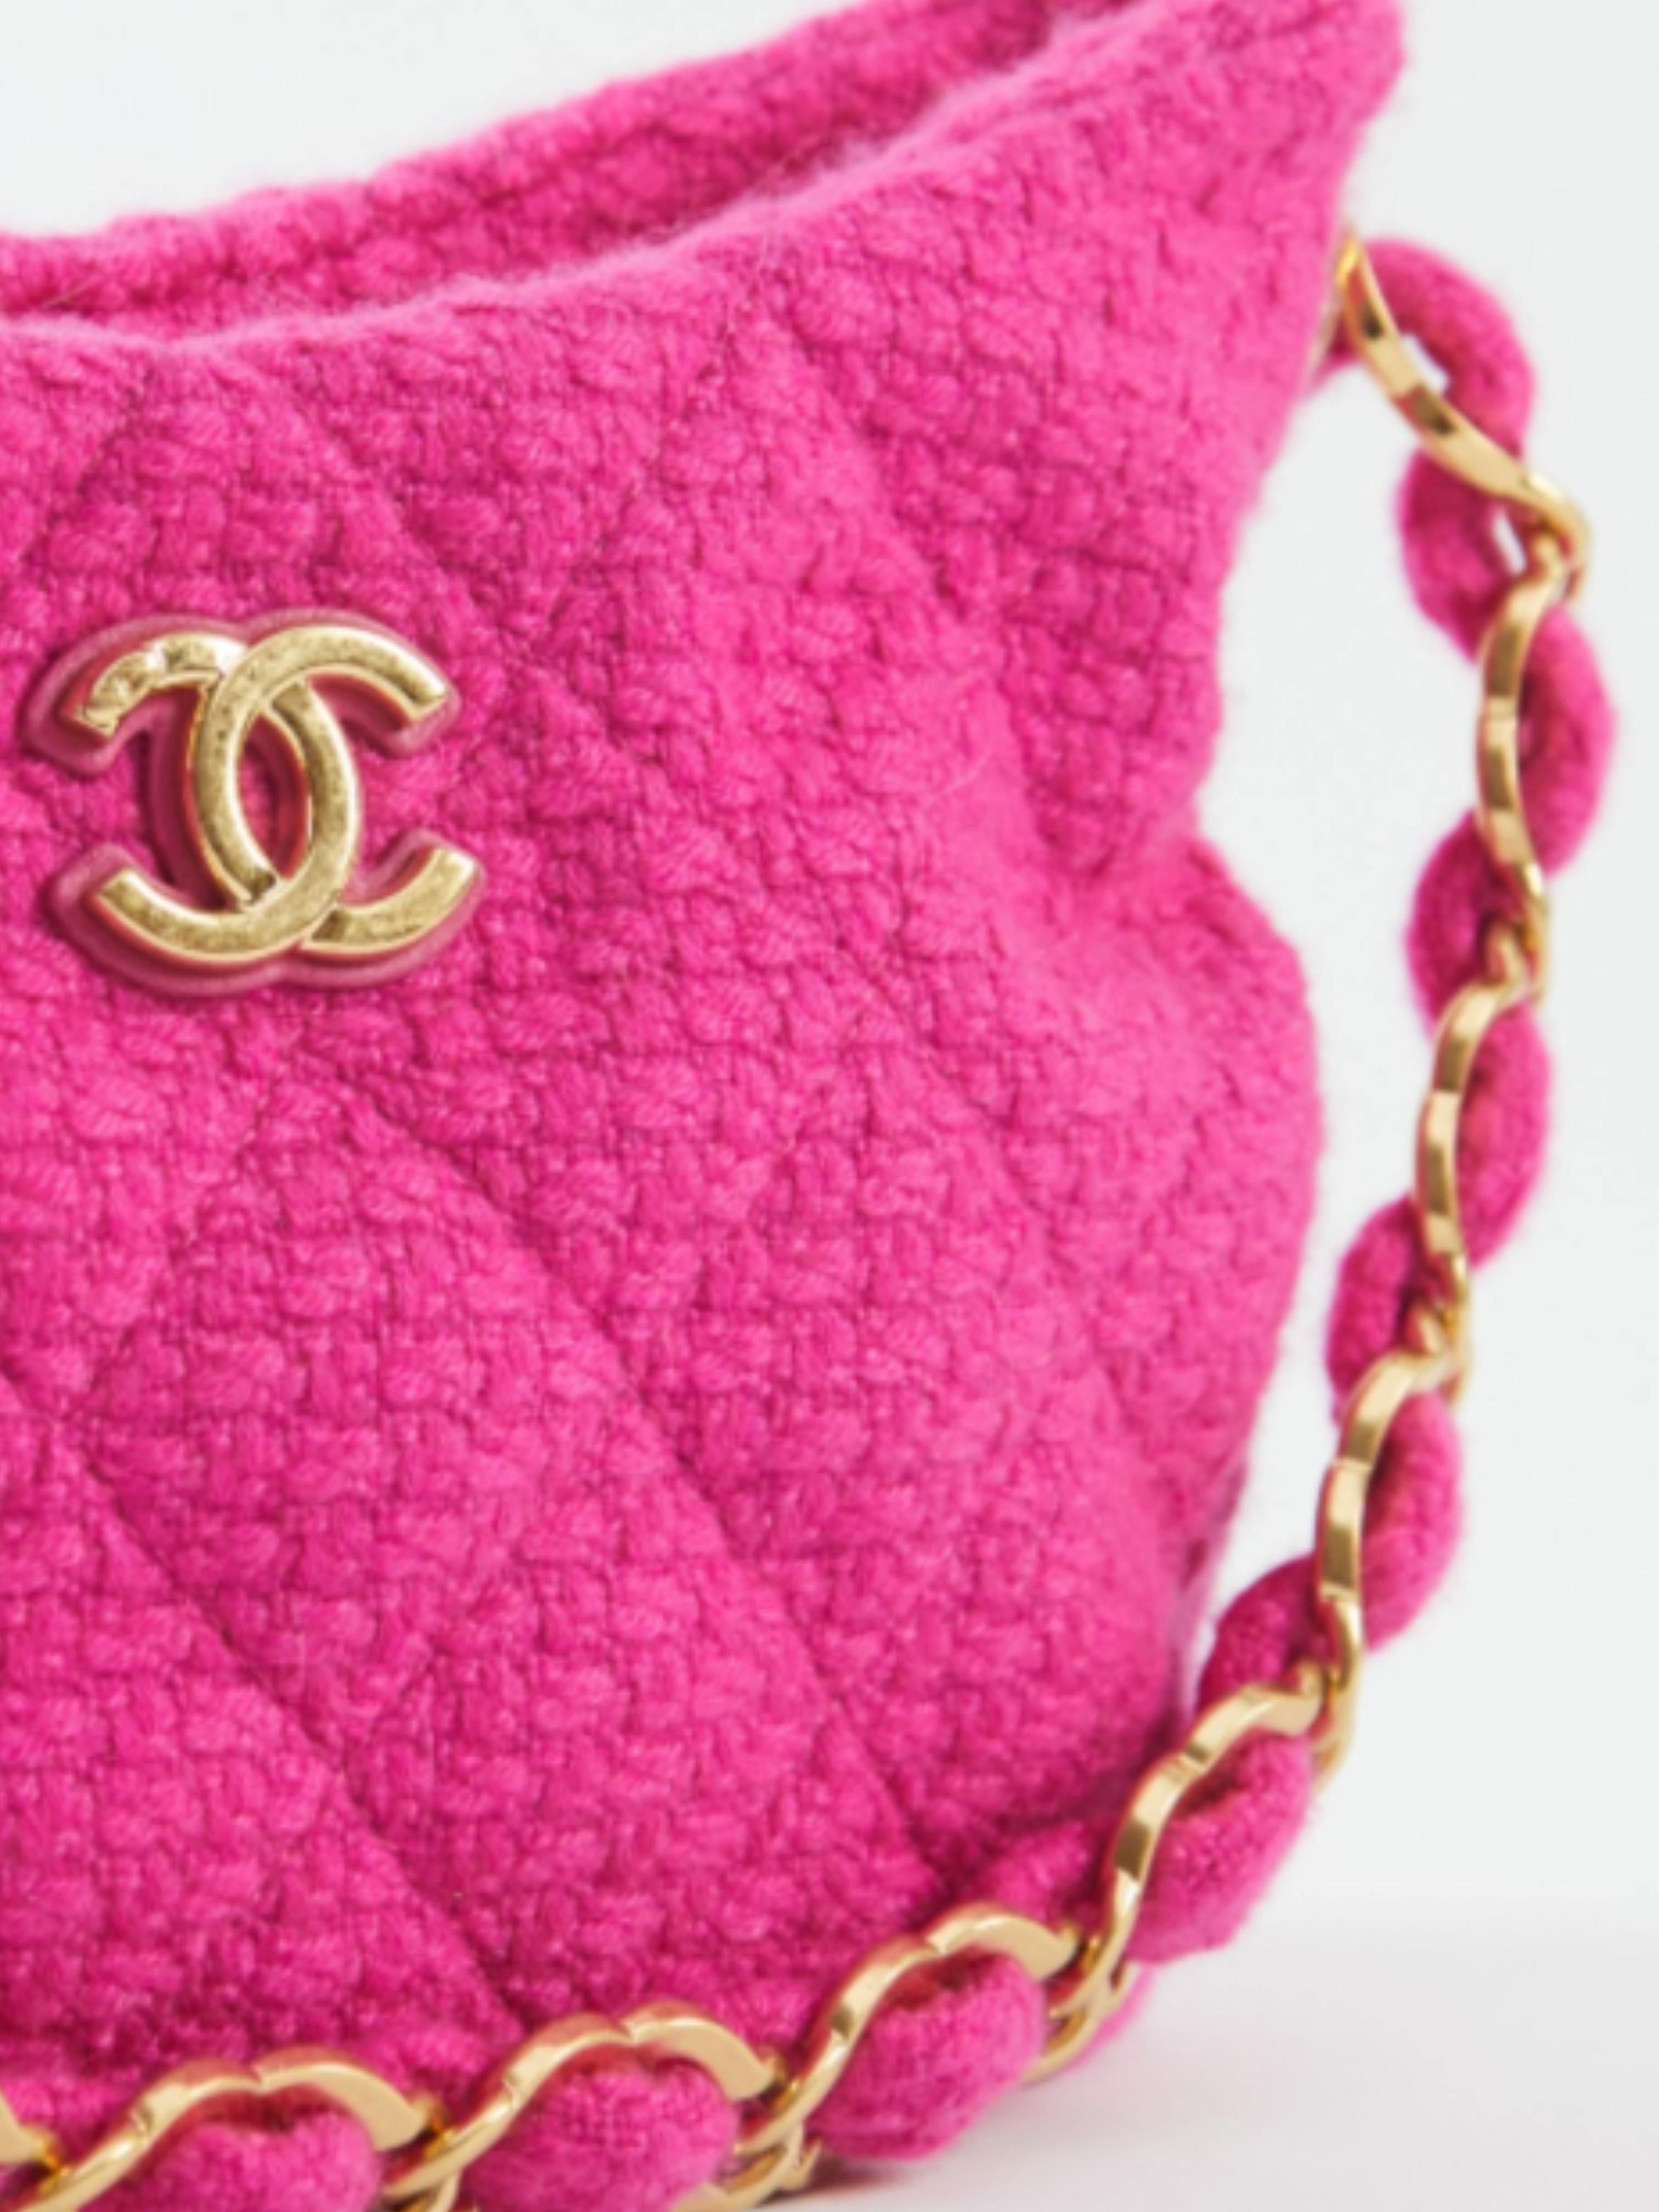 Pink CHANEL GABRIELLE HOBO BAG PINK Tweed with Gold-Tone Hardware For Sale